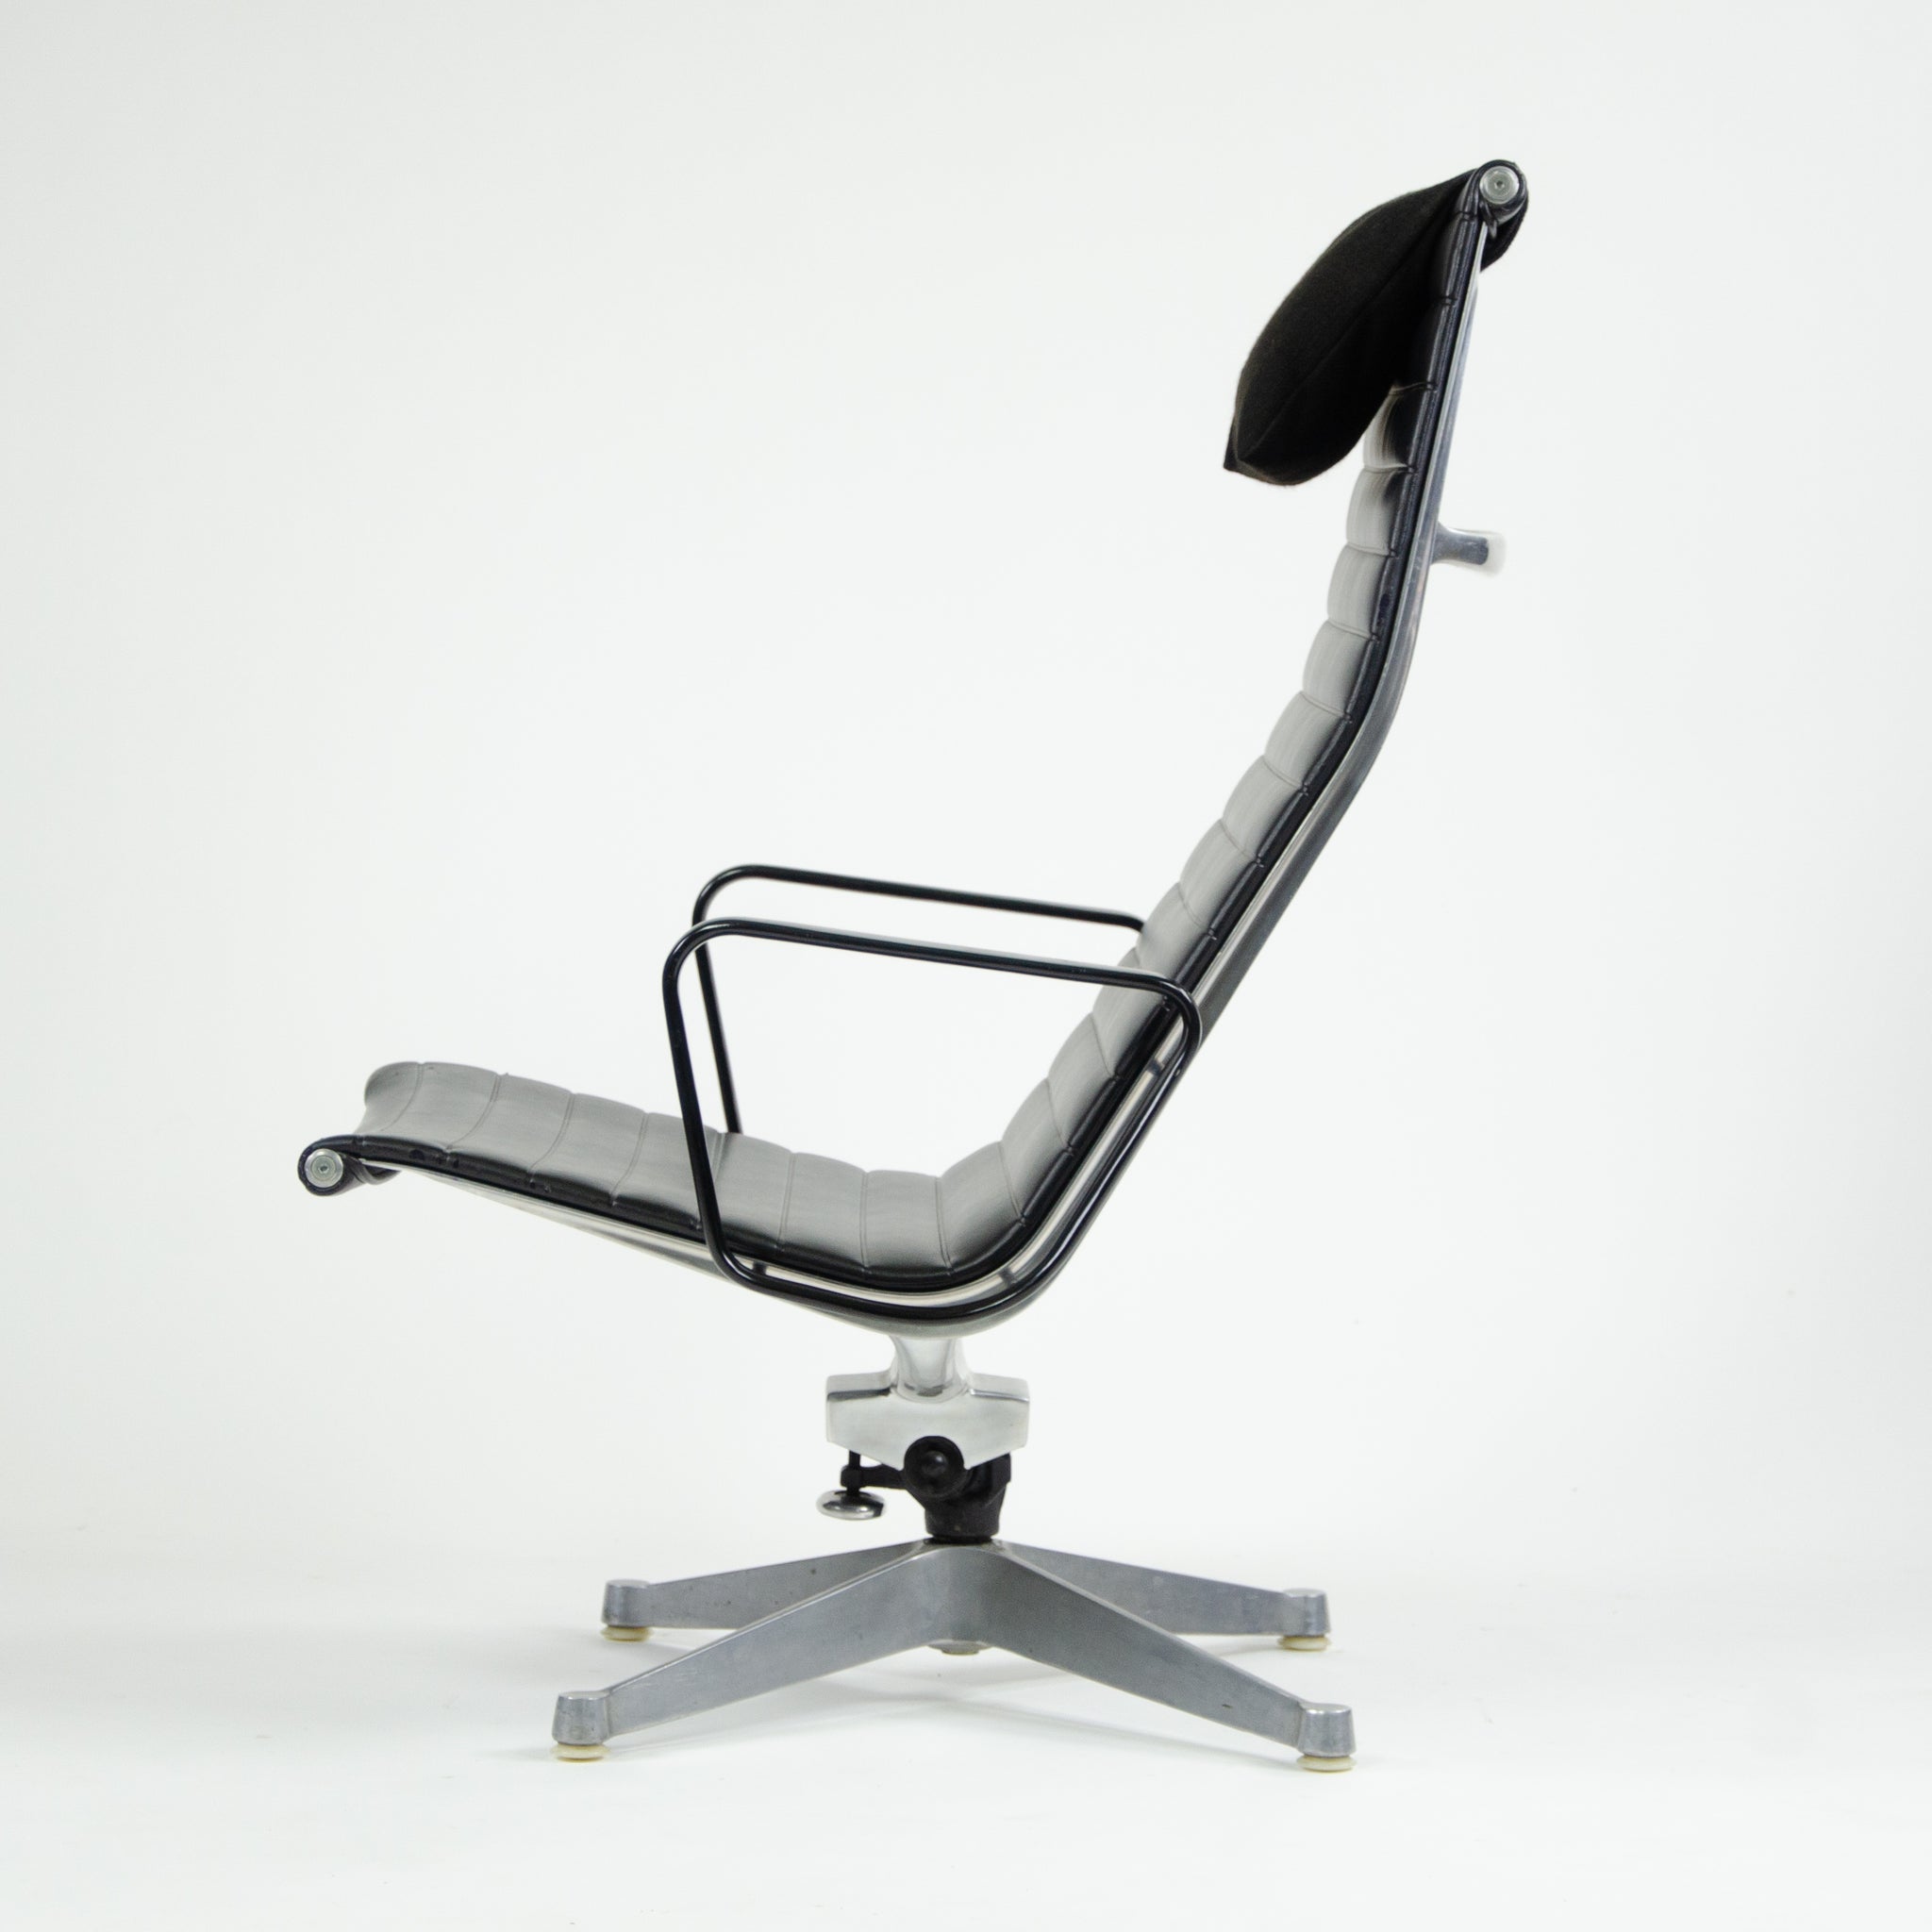 SOLD Museum Quality Eames Herman Miller Aluminum Group Lounge Chair, Black Upholstery